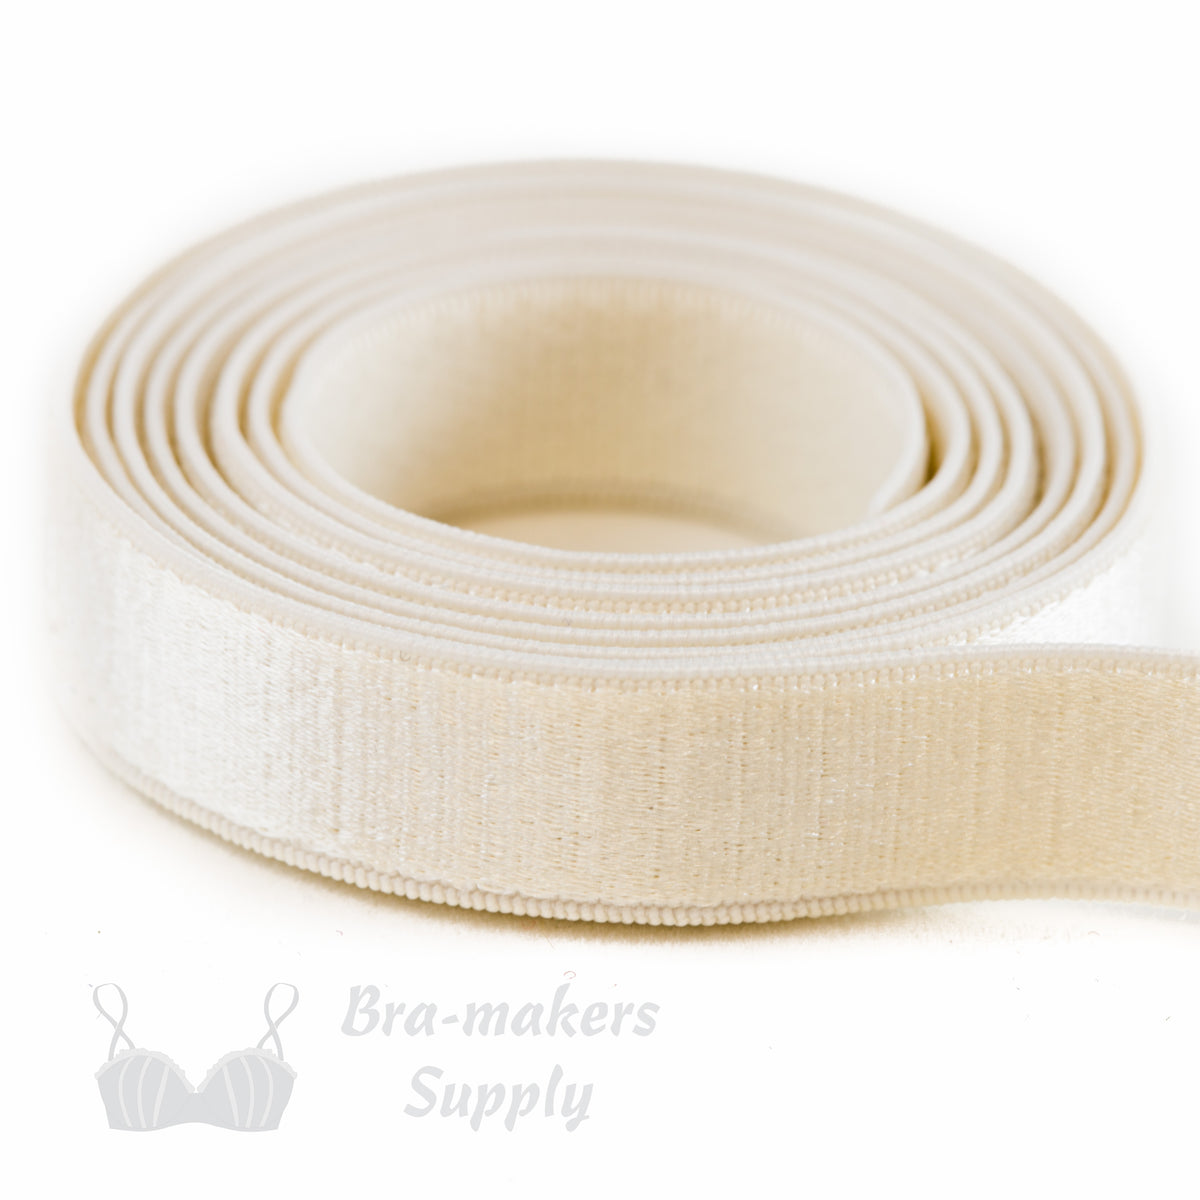 http://themakehouse.ca/cdn/shop/products/half-inch-12mm-Strap-Elastic-ivory-ES-4-or-half-inch-12mm-Satin-Strap-Elastic-Winter-White-Pantone-11-0507-from-Bra-makers-Supply-1-metre-roll-shown_1200x1200.jpg?v=1587614363